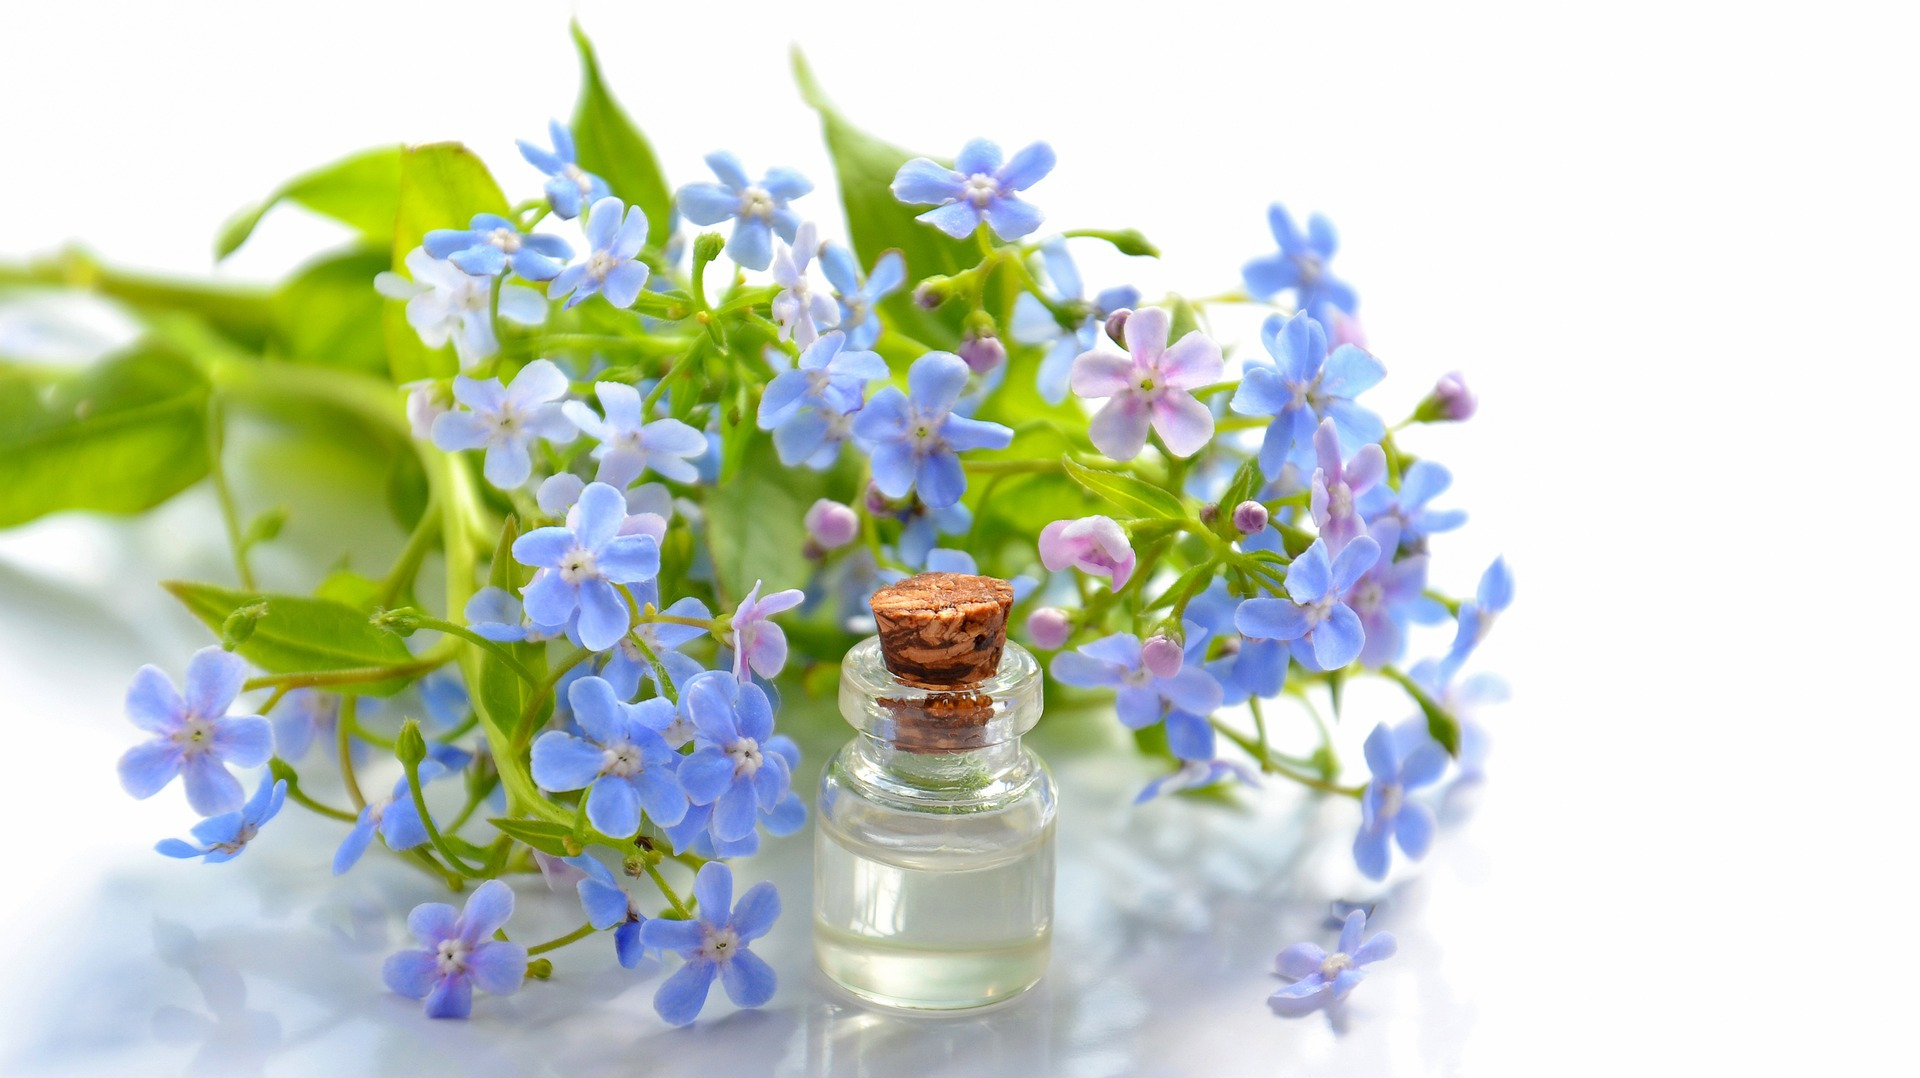 Selecting Quality Essential Oils